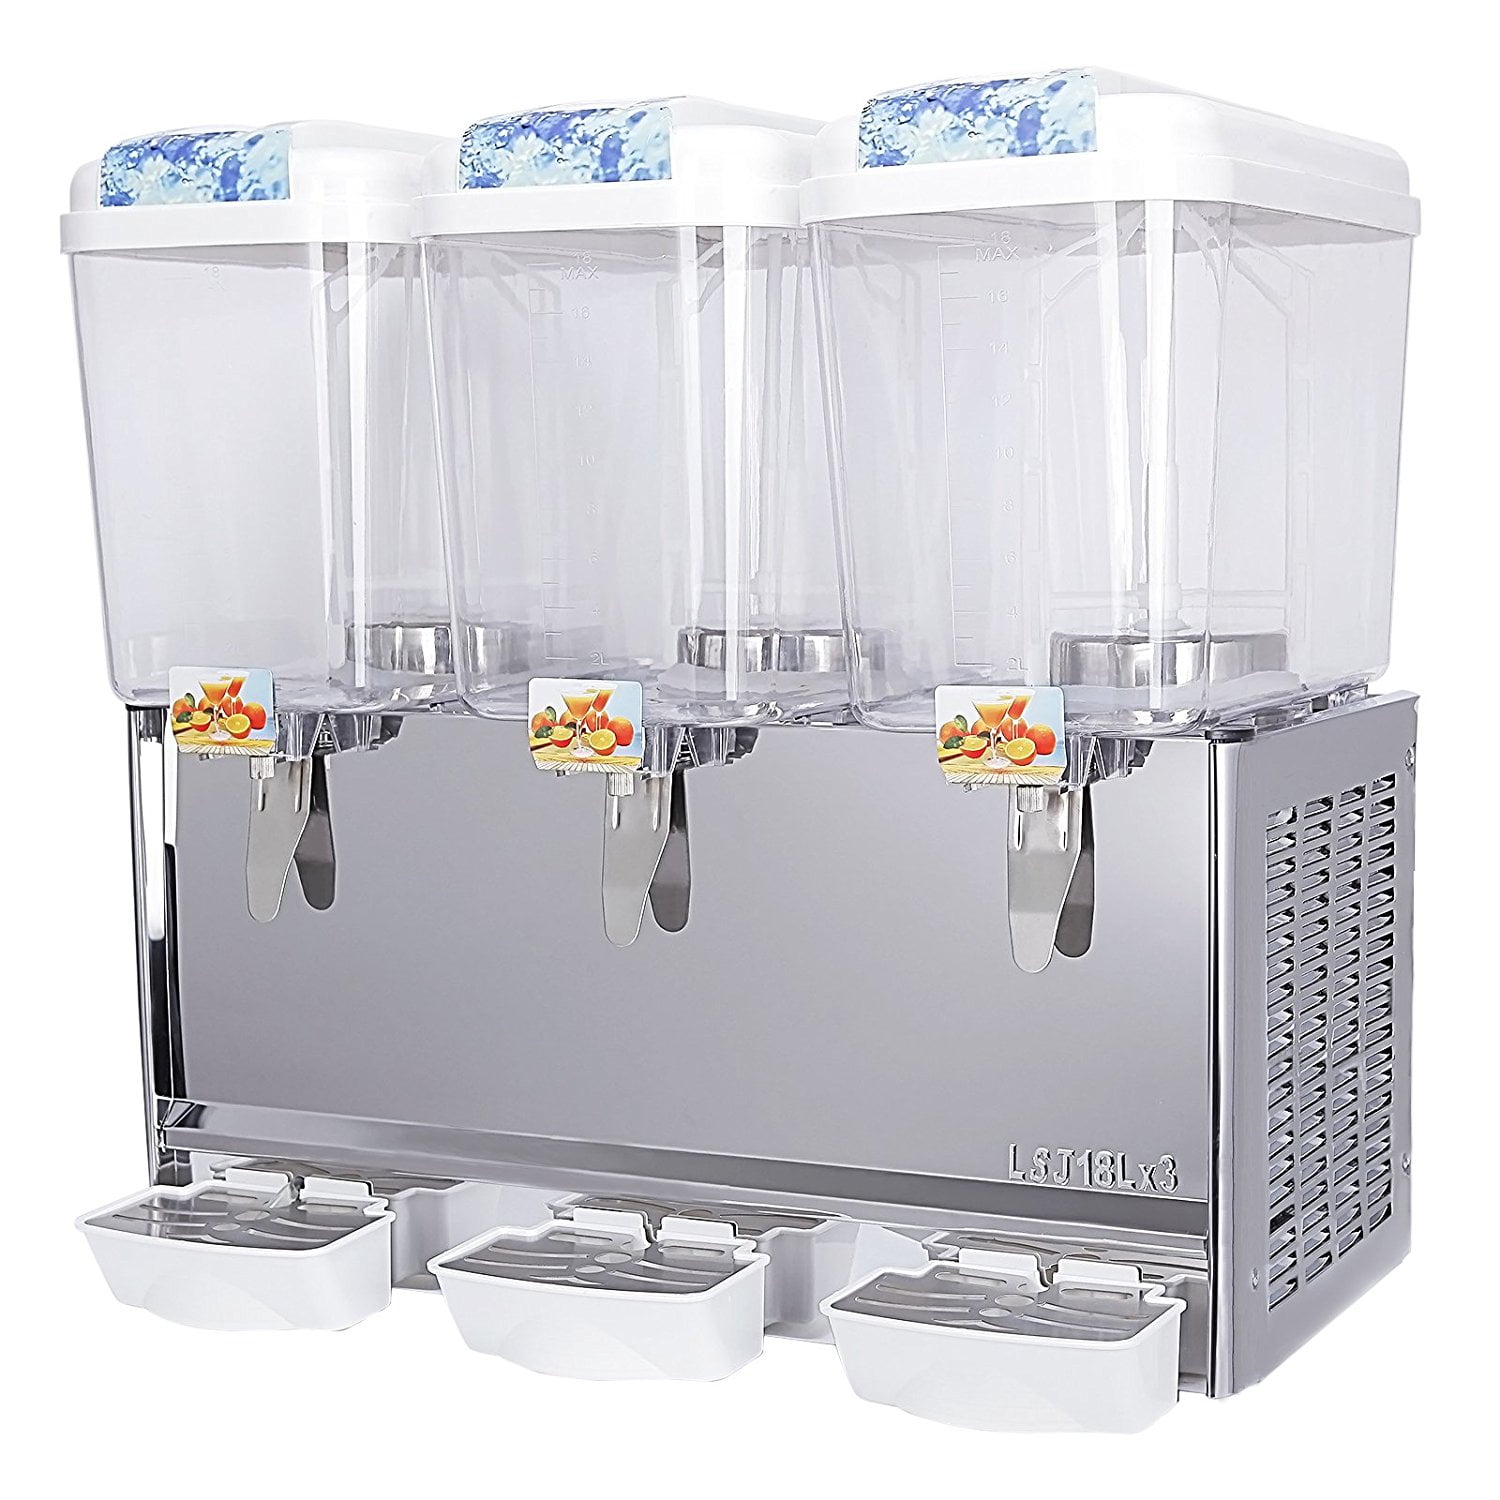 KWS Commercial Stainless Steel Hot and Cold Drink Dispensers Professional  Beverage Dispensers 3 Tanks 3 Gallon per Tanks